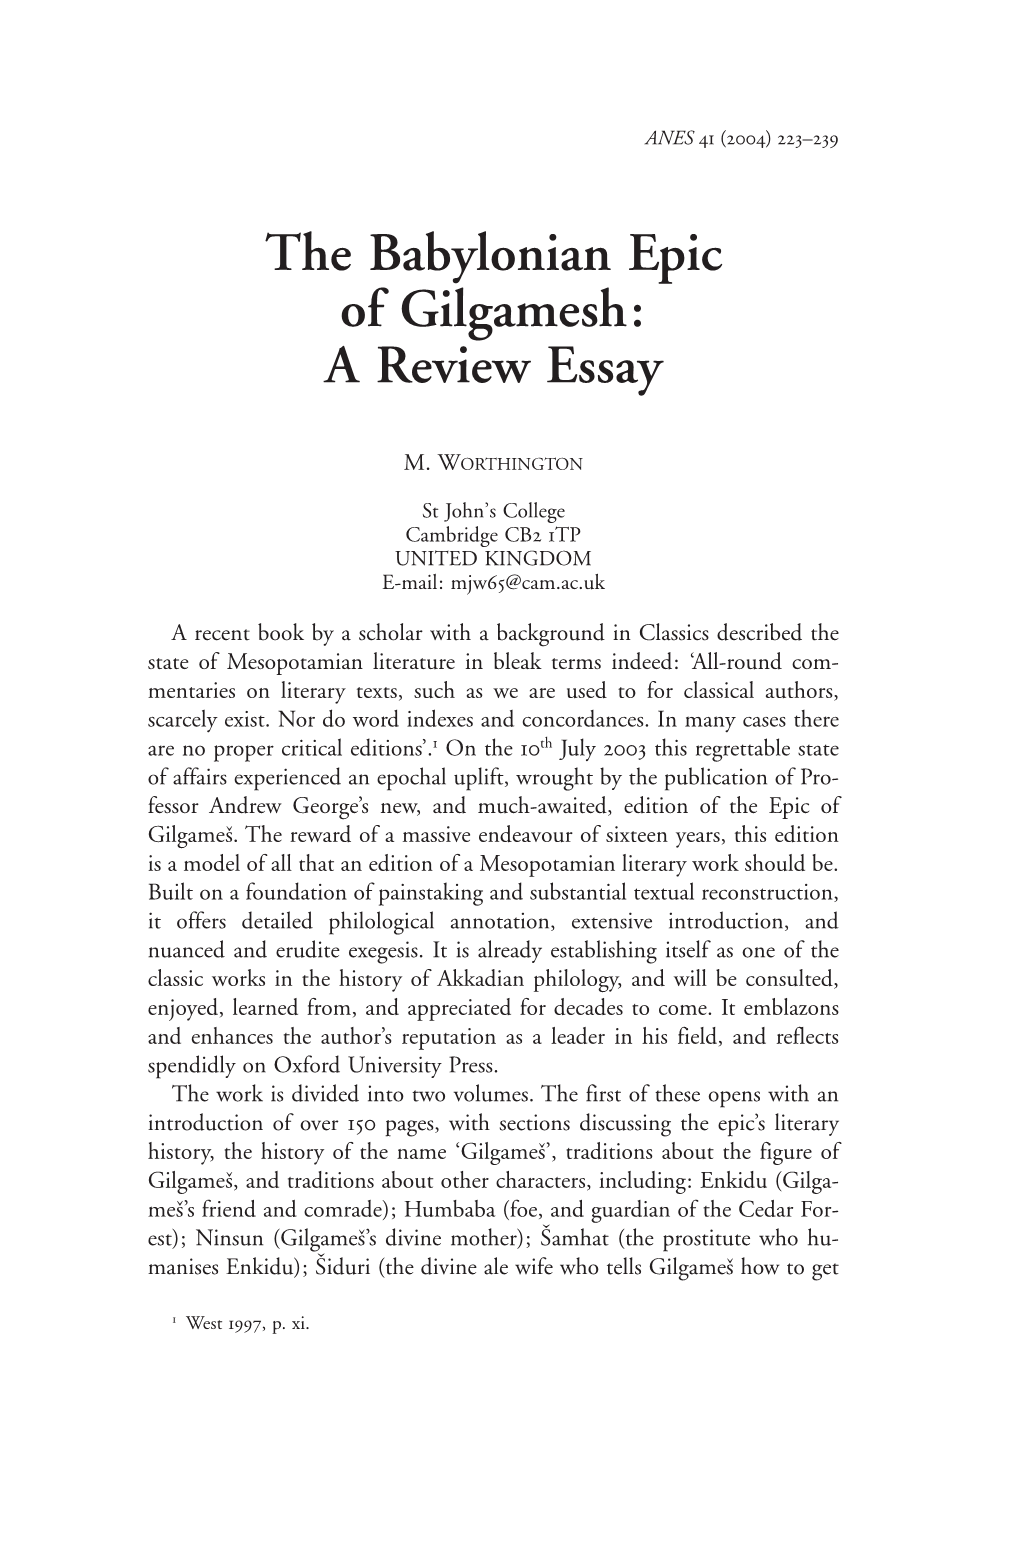 The Babylonian Epic of Gilgamesh: a Review Essay